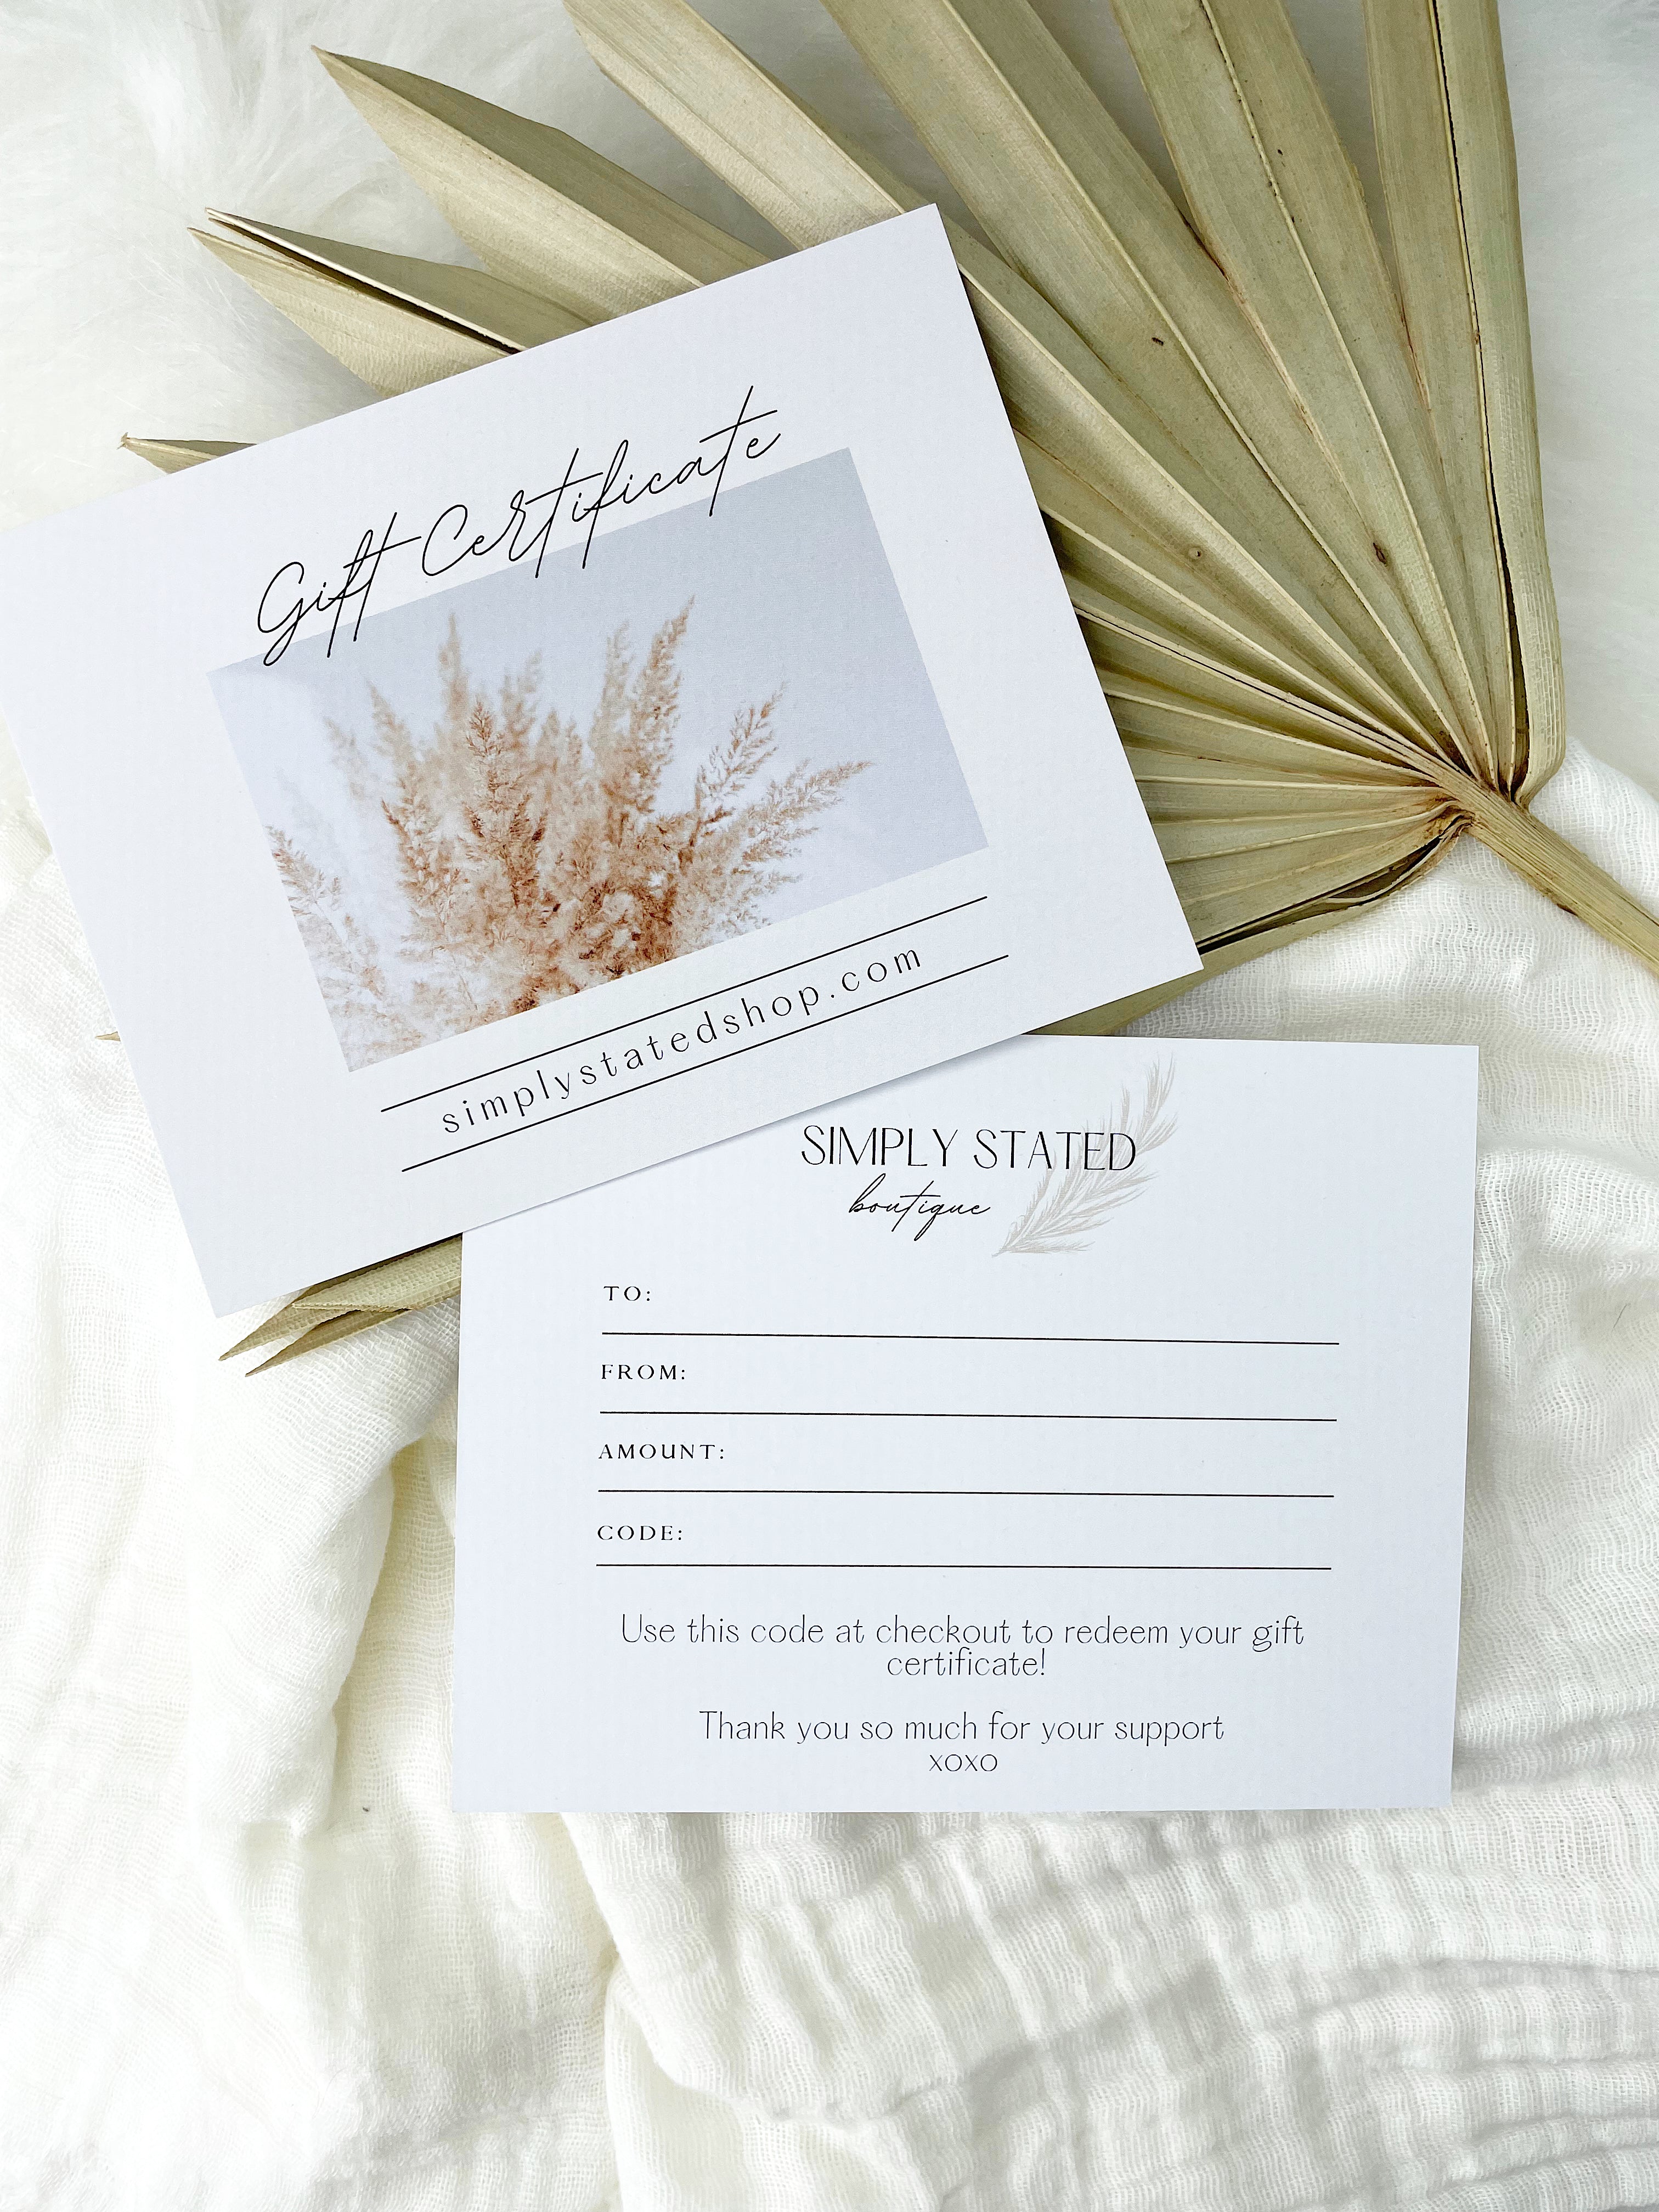 Simply Stated Gift Certificate